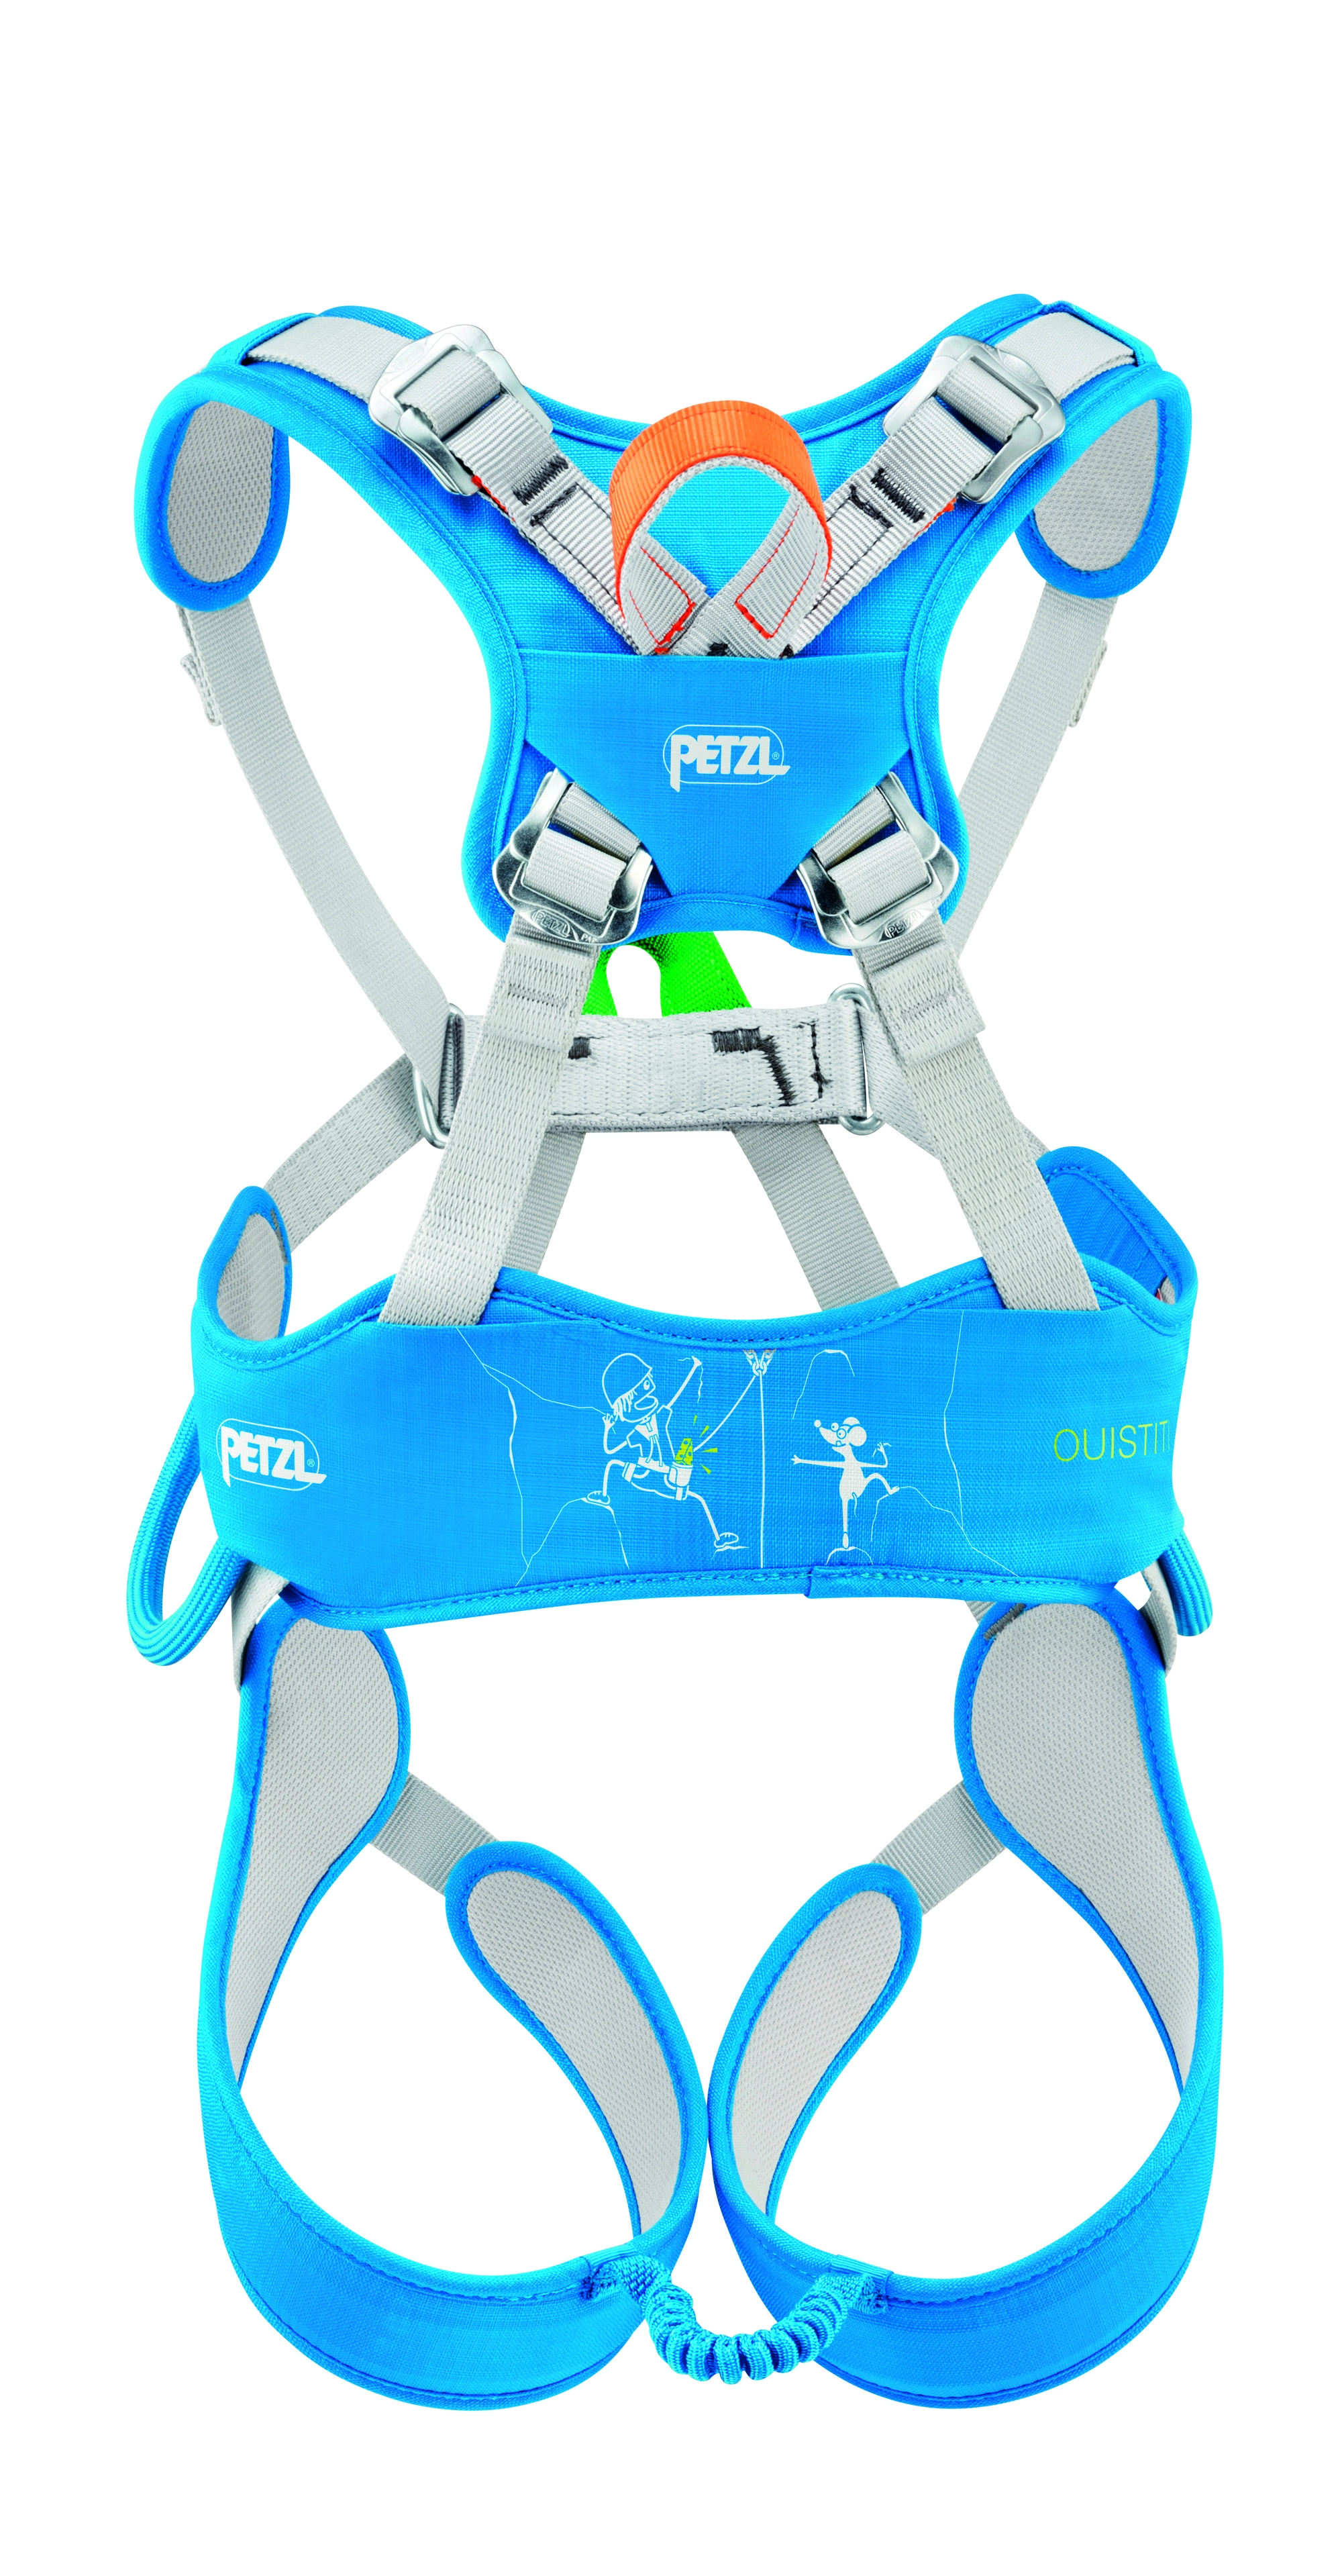 OG_2022_Listicle_KlettermitKindern_Petzl_Ouistiti_C068AA00-OUISTITI-view-2_HighRes